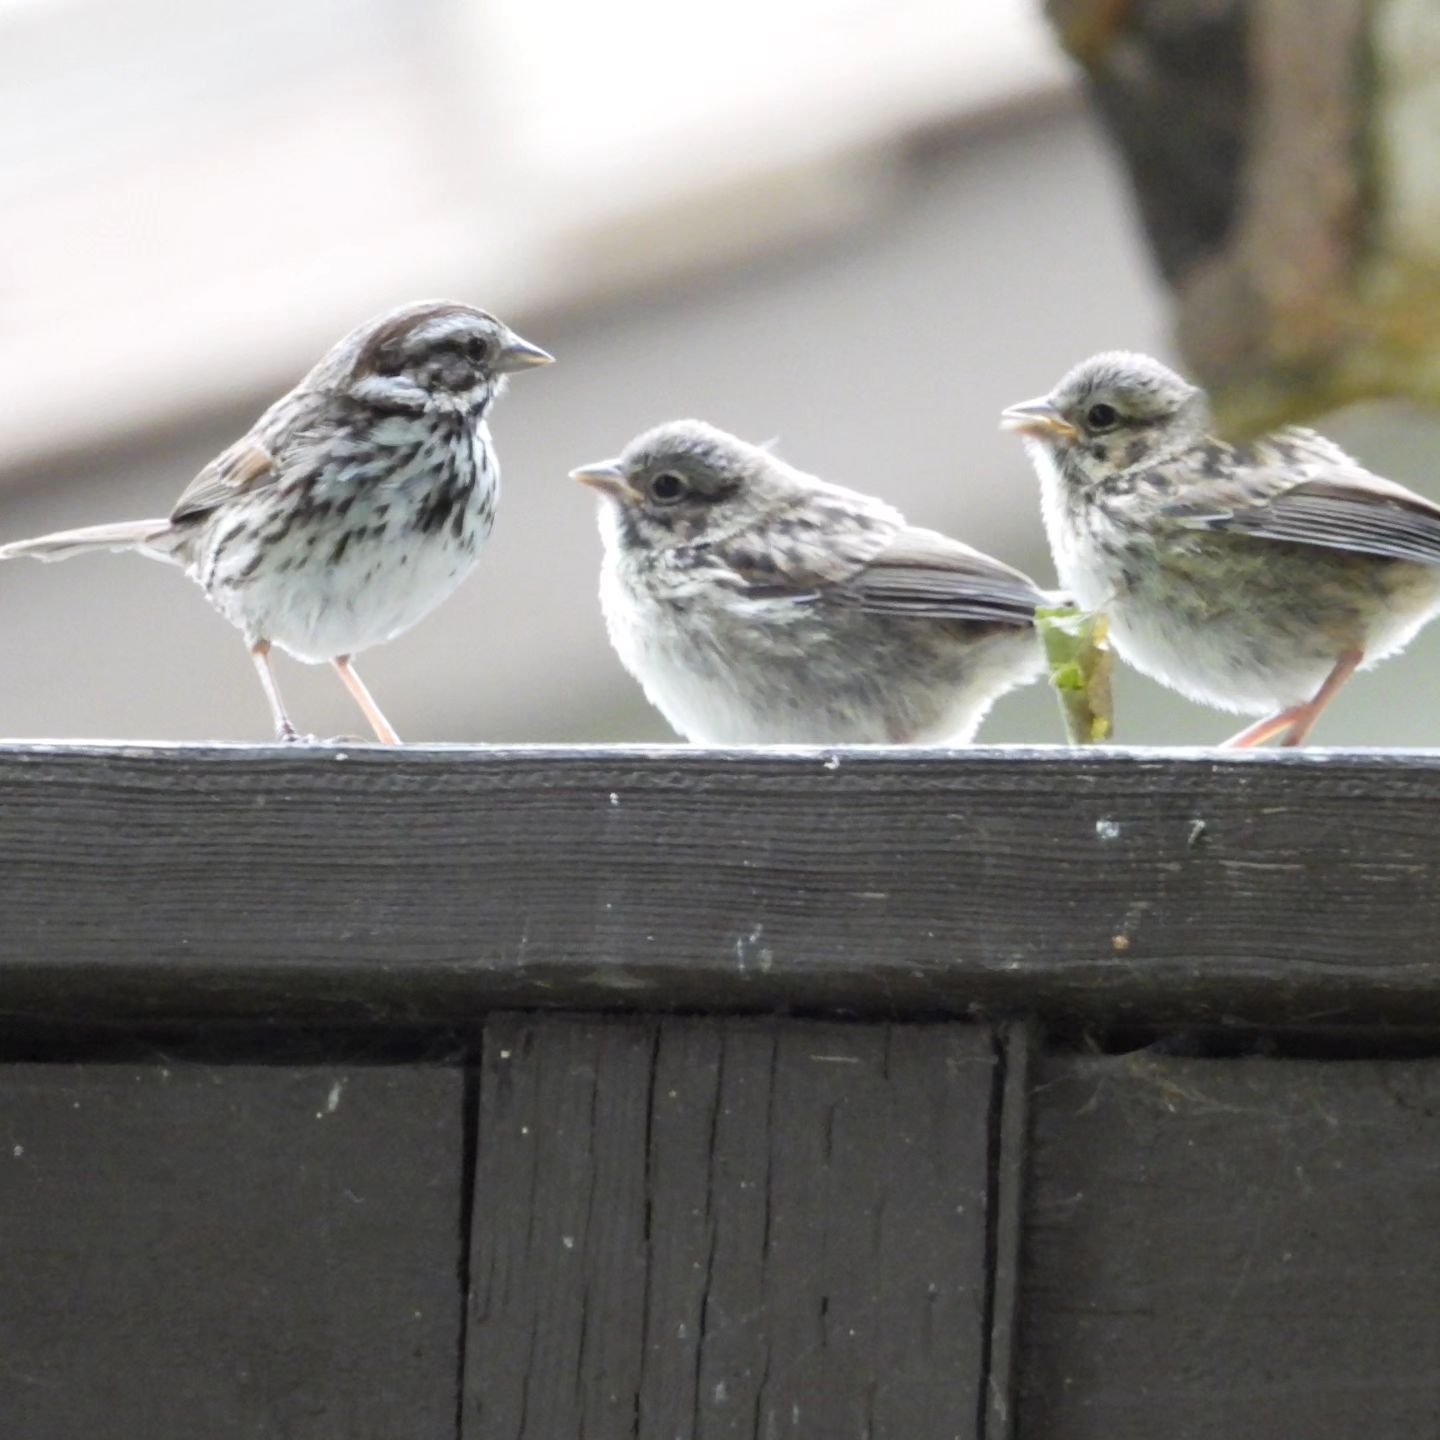 ⚜️There is no influence so powerful as that of the mother
-Sara Josepha Hale

photos from my nest (at home)
Song sparrow + her sparrowlings
*
*
*
#mothersday #birds #nest
#peaceandlove #mother #motherfigure #song #sparrow